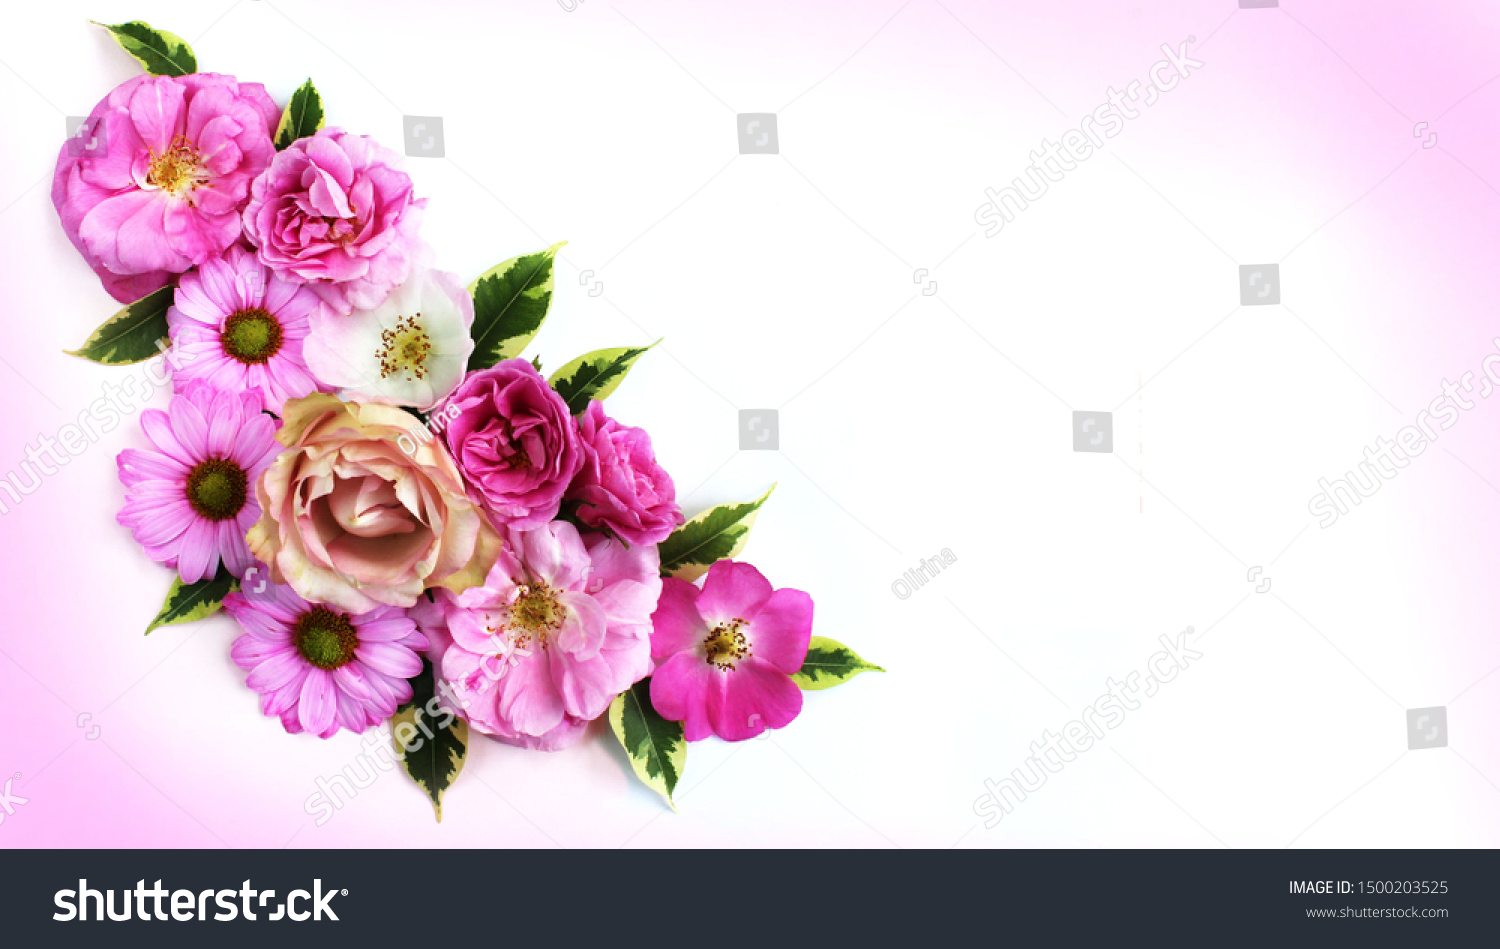 Festive floral arrangement of pink and crimson roses on a white background. Delicate pastels. Delicate style. Background for cards, invitations, greetings. #1500203525